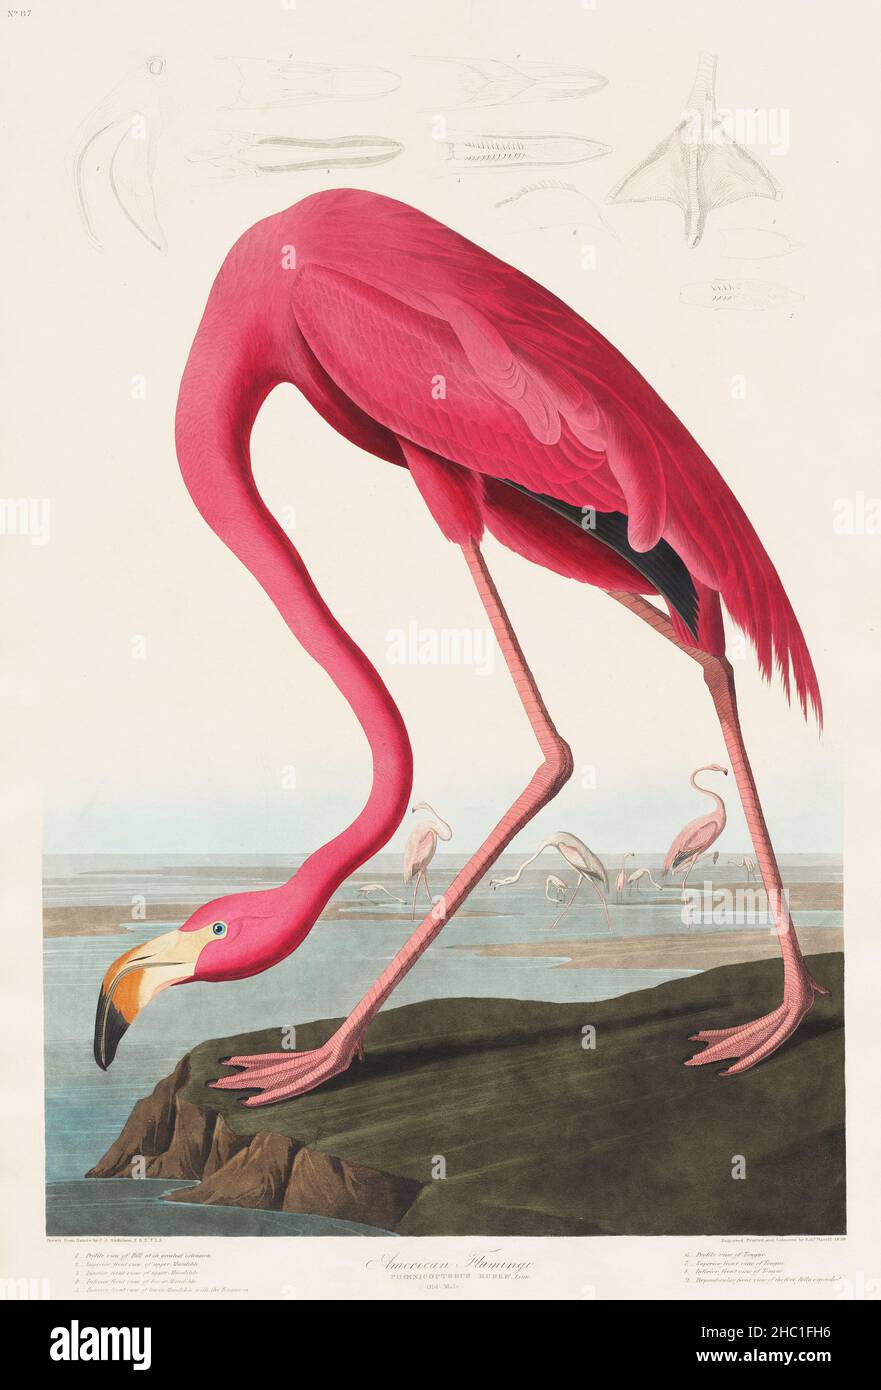 Pink Flamingo from Birds of America (1827) by John James Audubon (1785-1851) etched by Robert Havell (1793-1878). Stock Photo